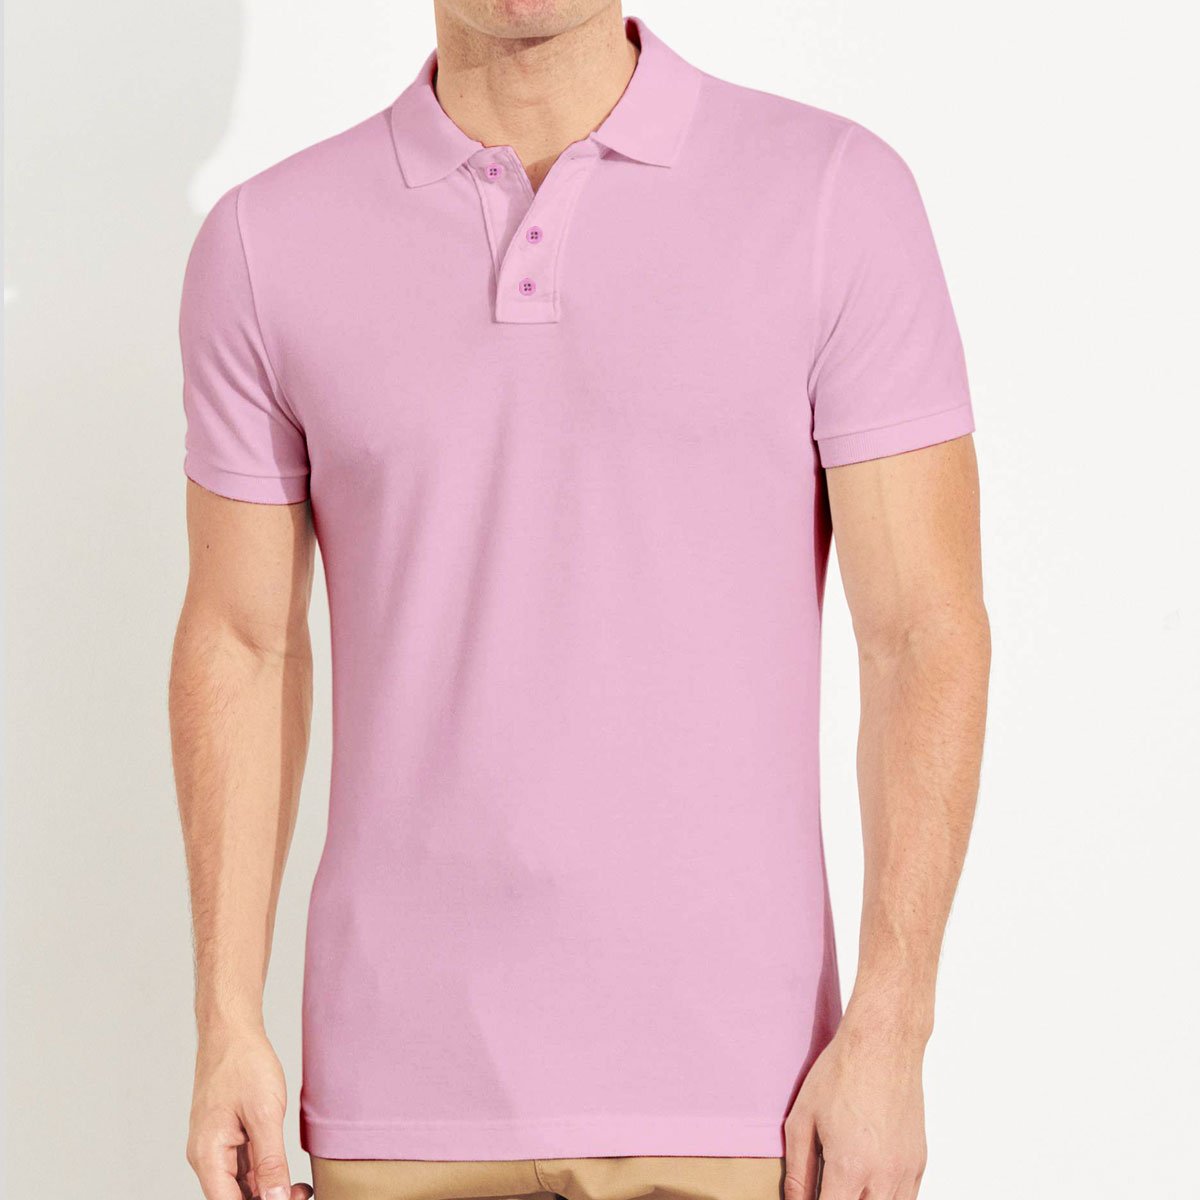 Smart Pink Polo Shirt : Buy Online At Best Prices In Pakistan